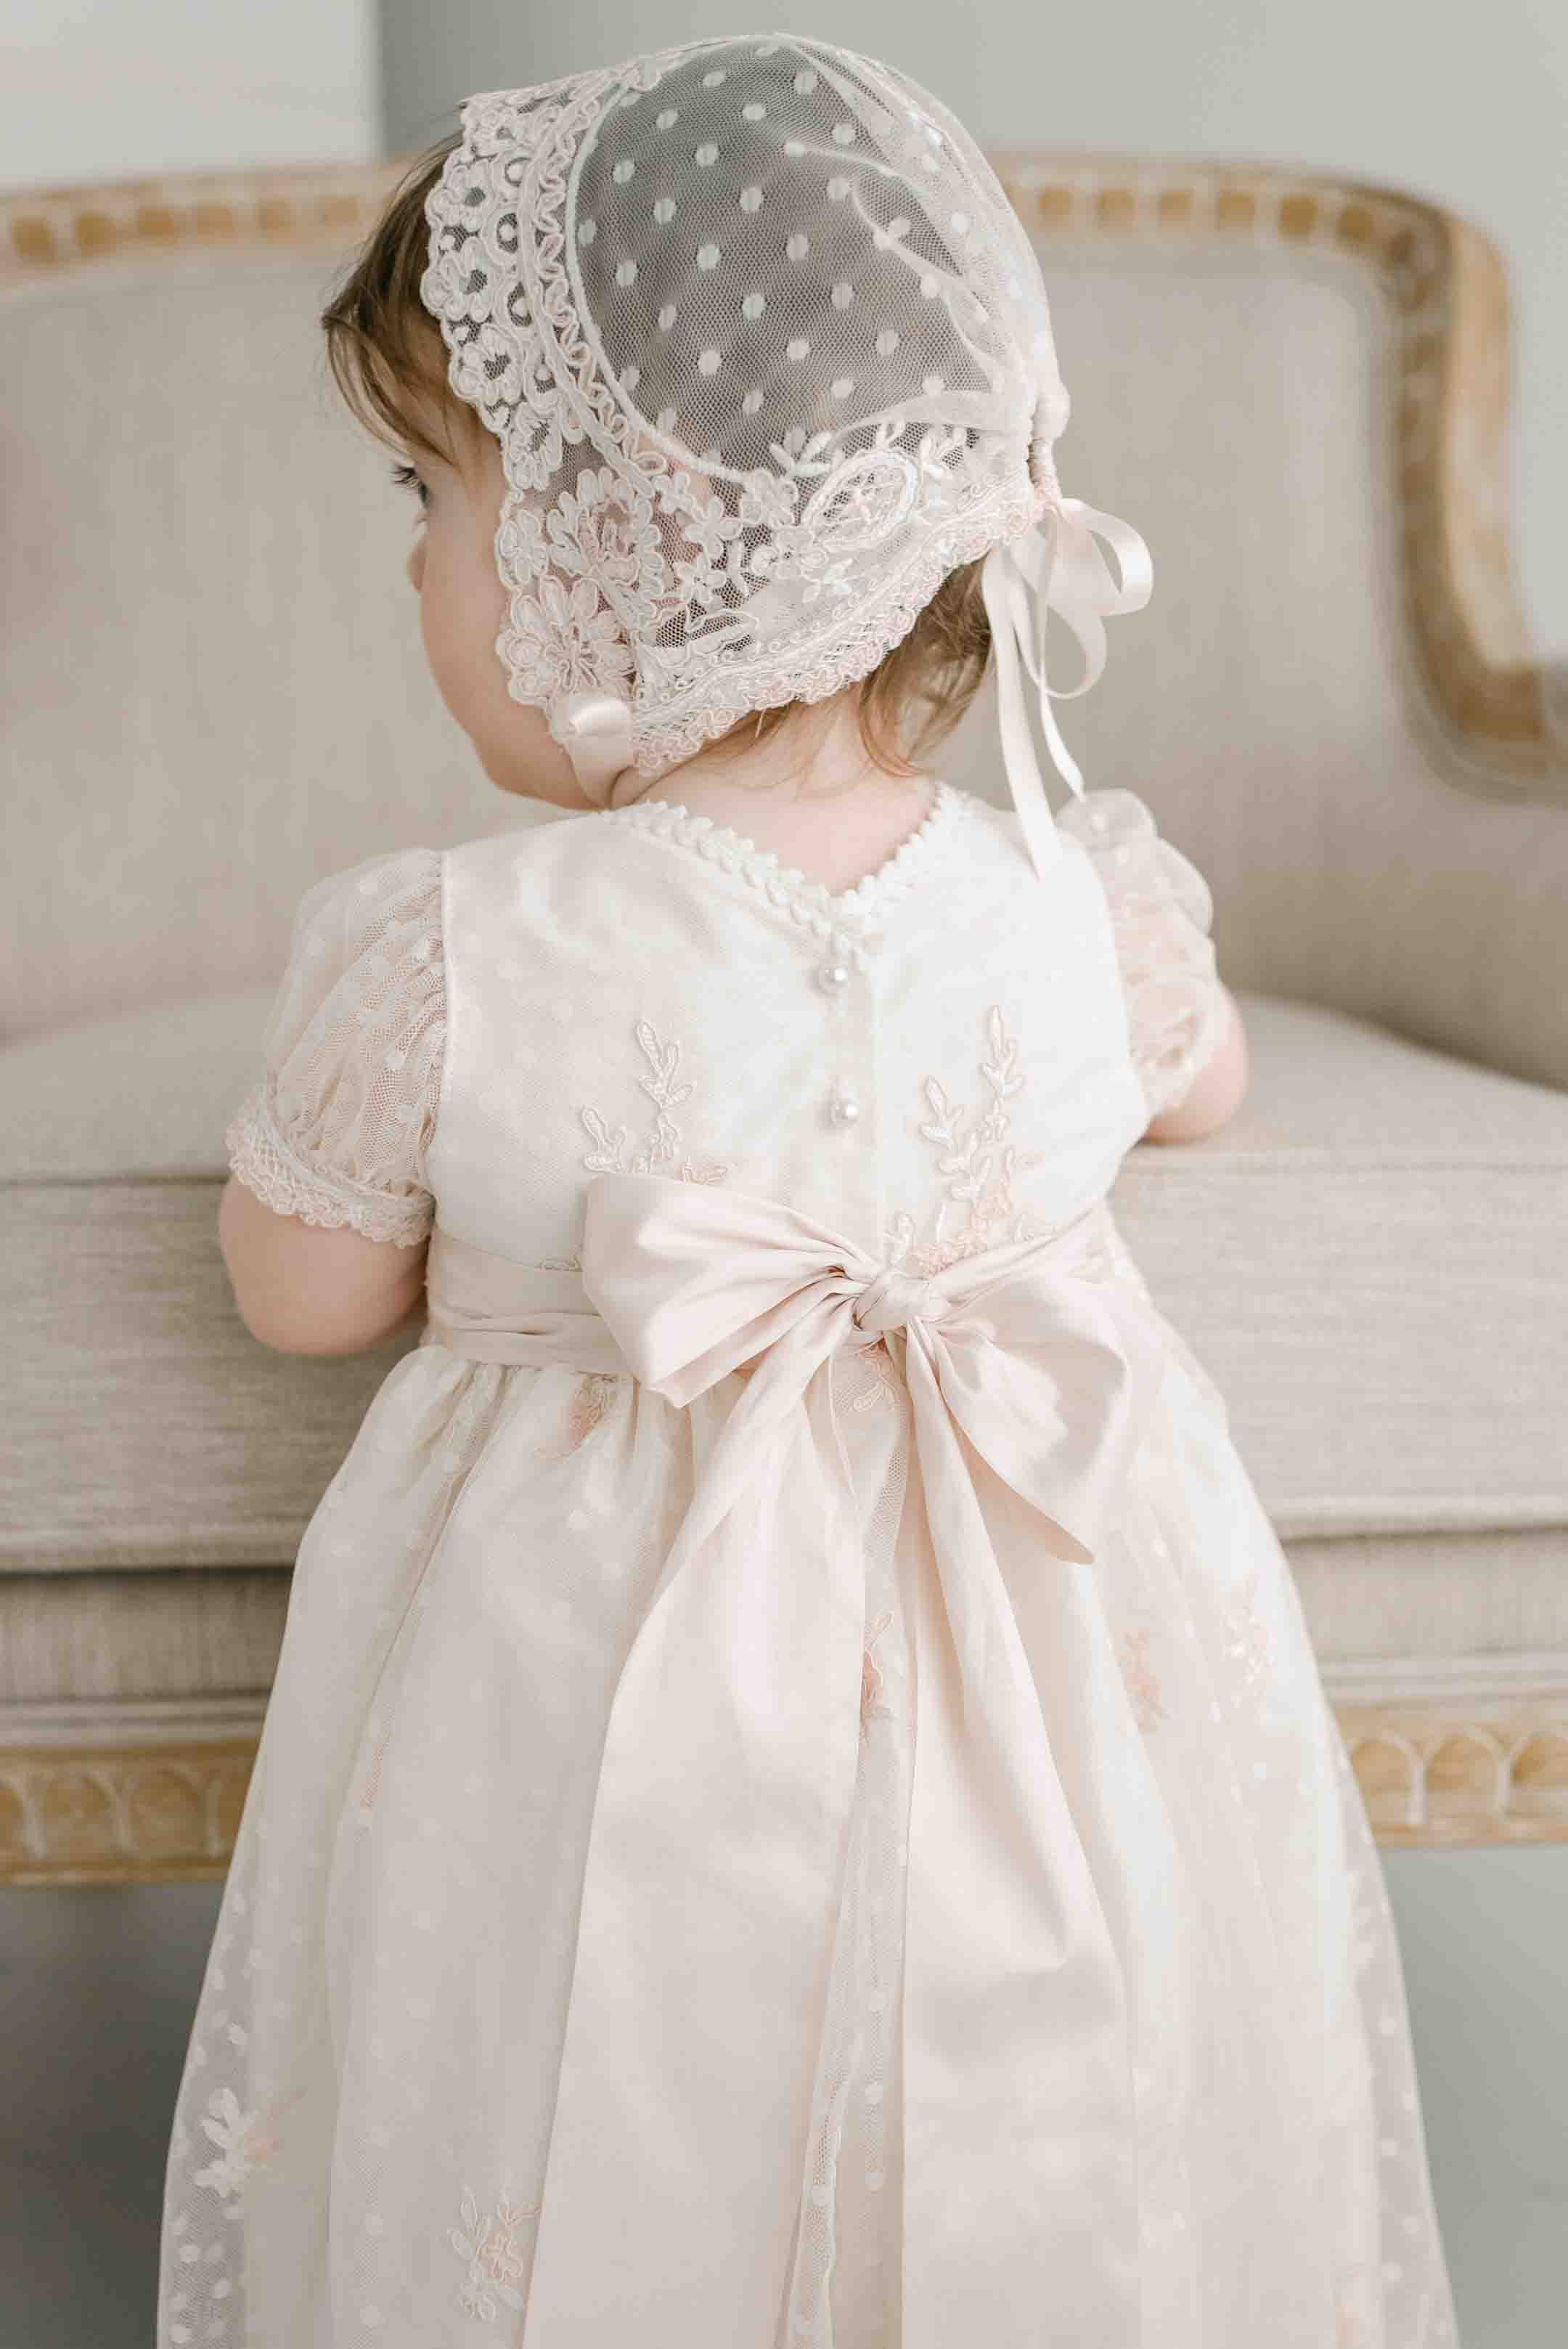 Royal Christening Gown | Smocked traditional gown and bonnet - Annafie